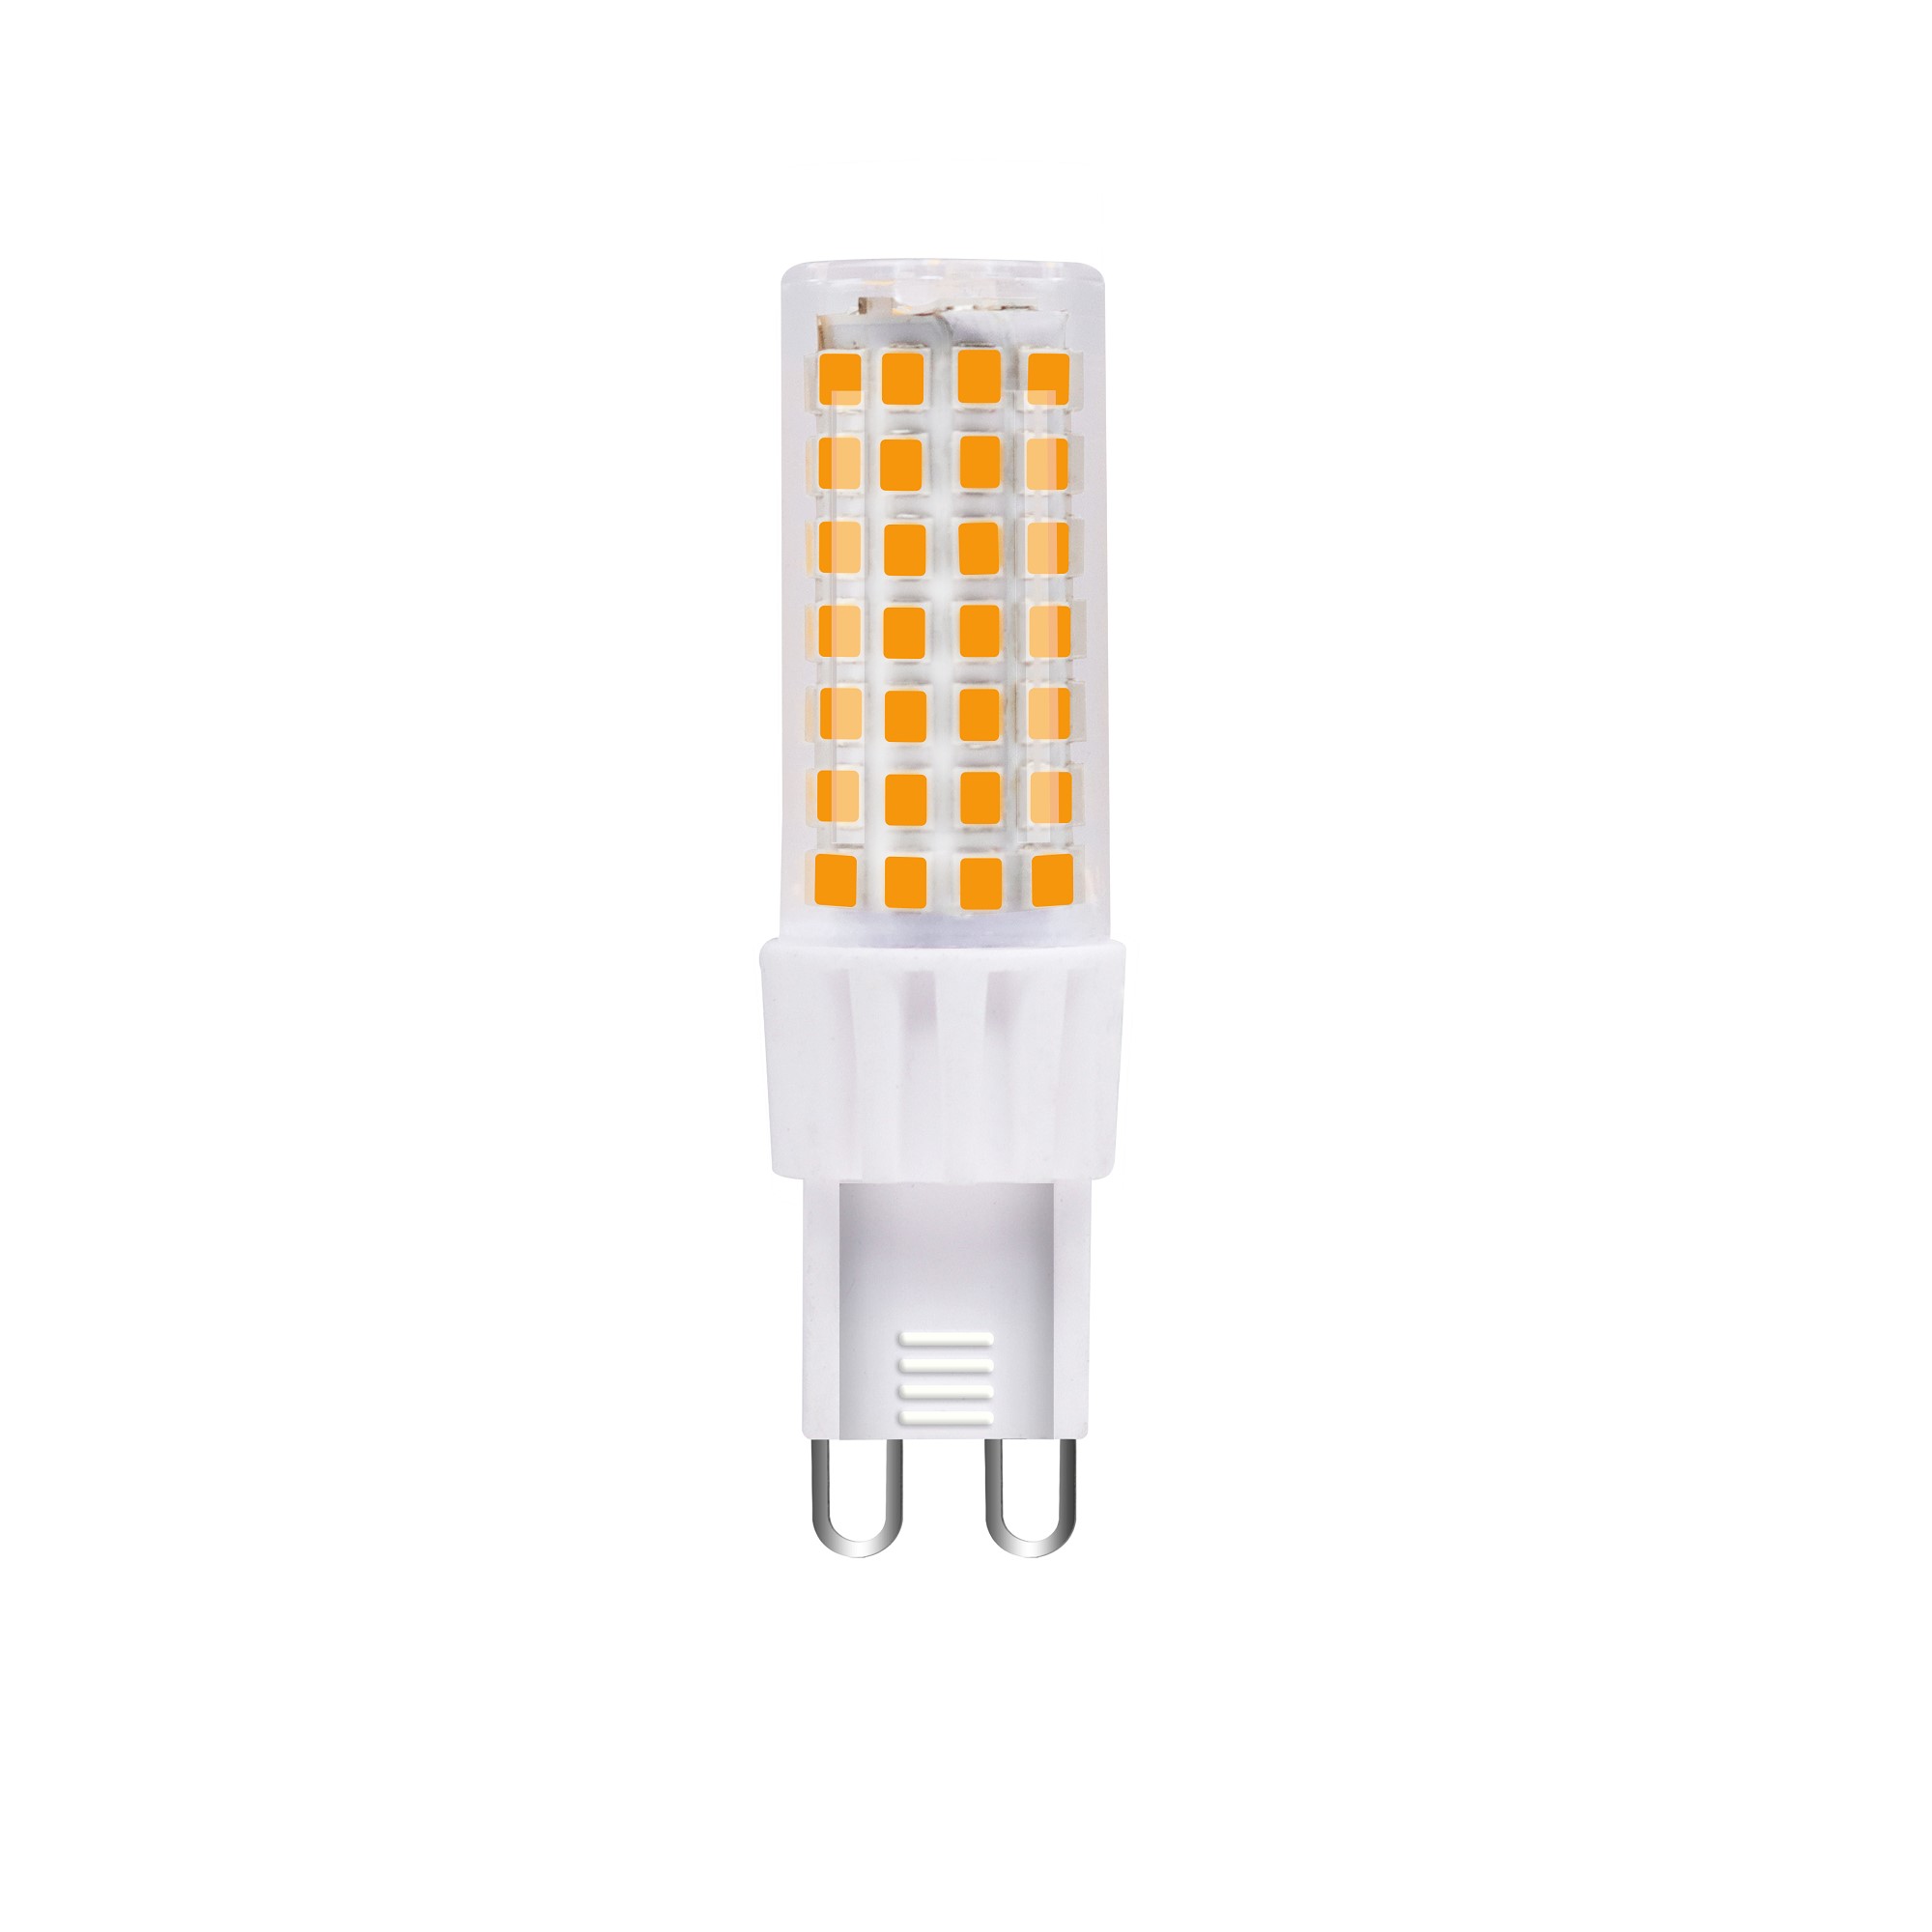 LED Lamp Pin Base Lamp G9 6W 3000K 600lm Dimmable CRI80 600lm